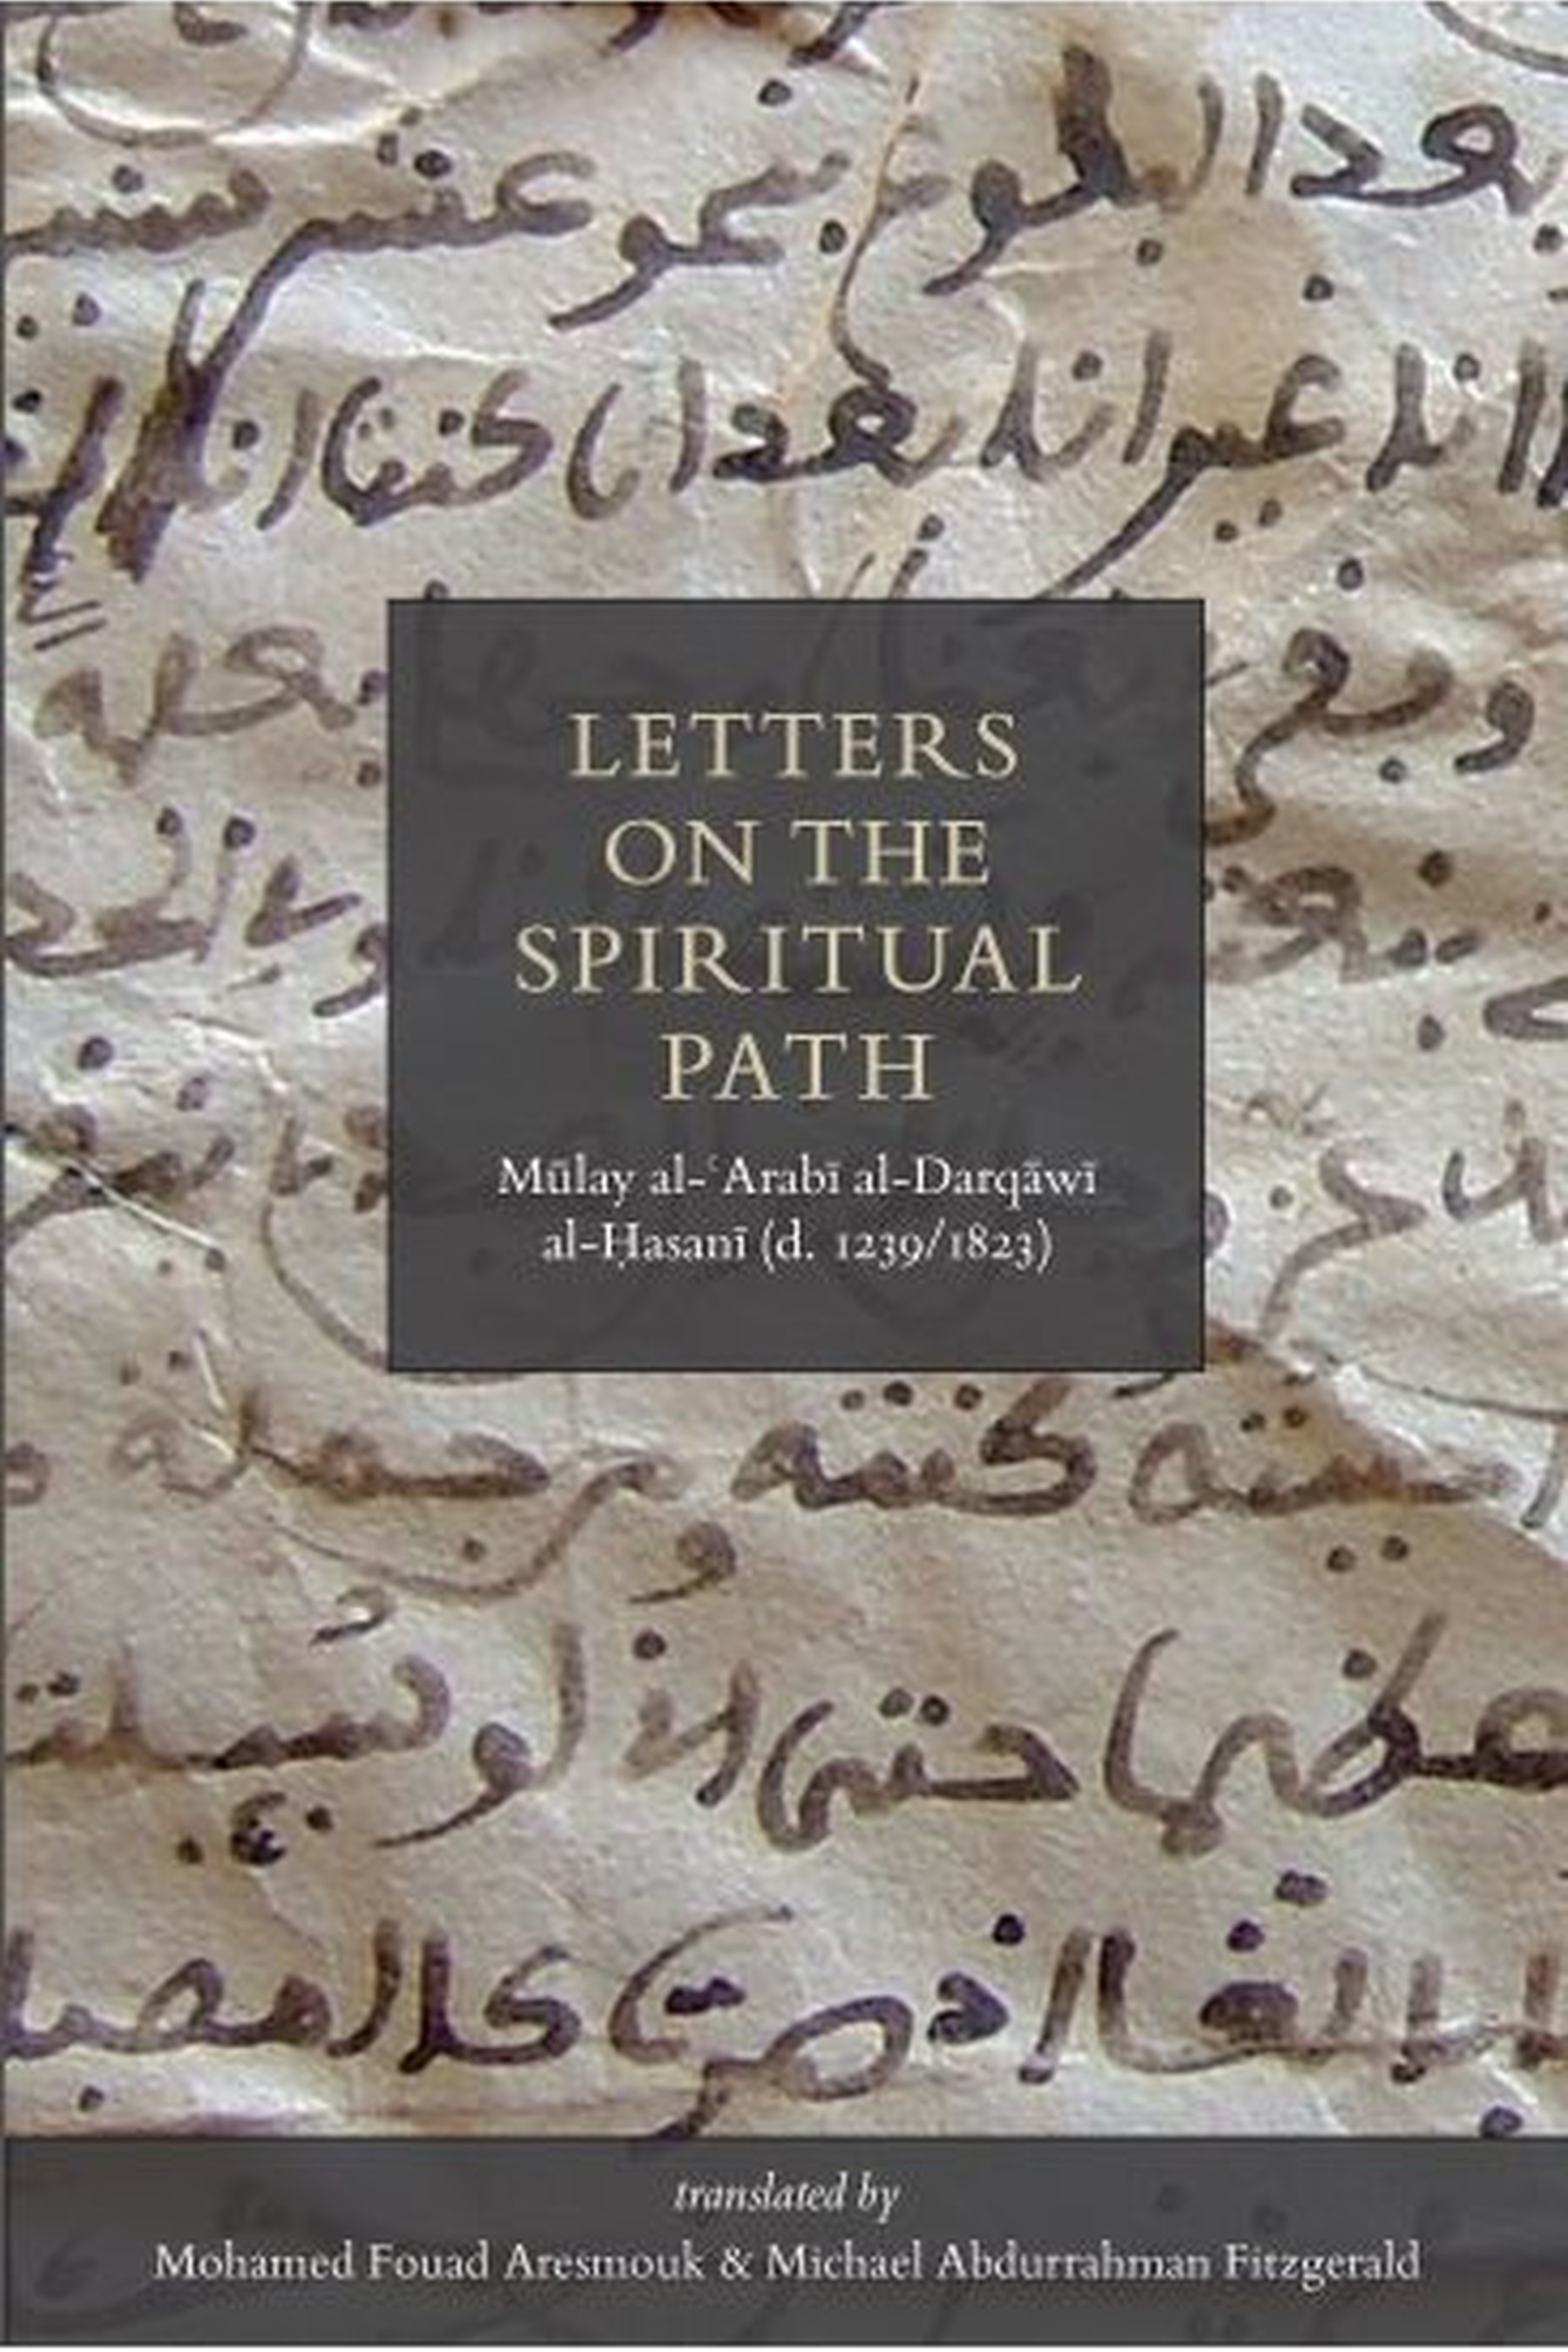 Letters on the spiritual path